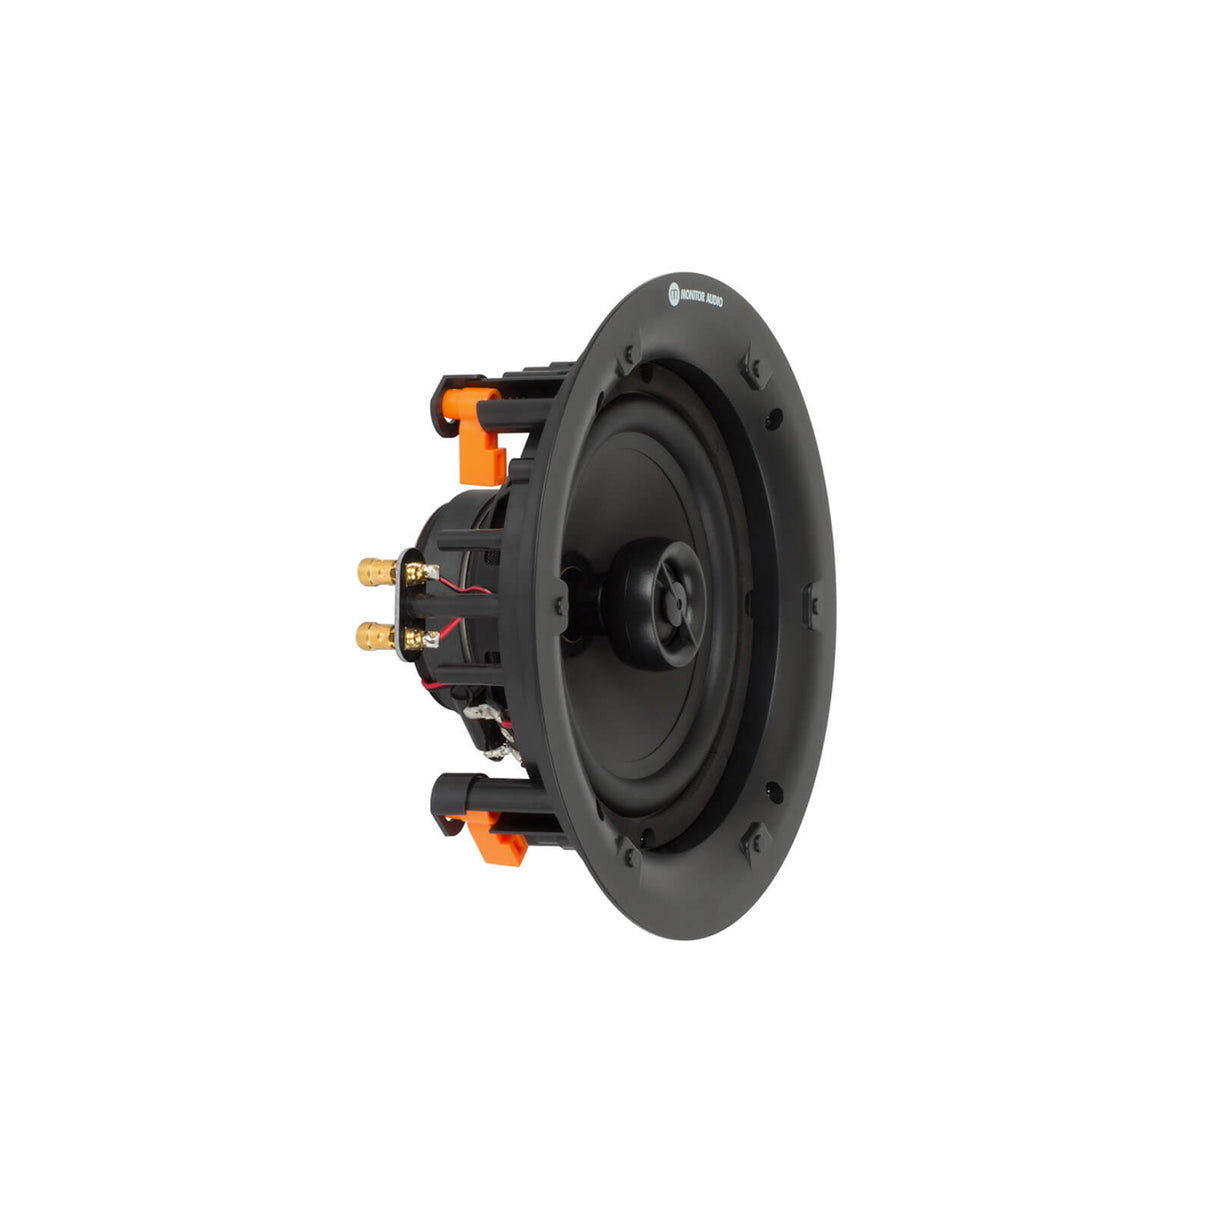 Monitor Audio Pro-65 In-Ceiling Speakers (Each)